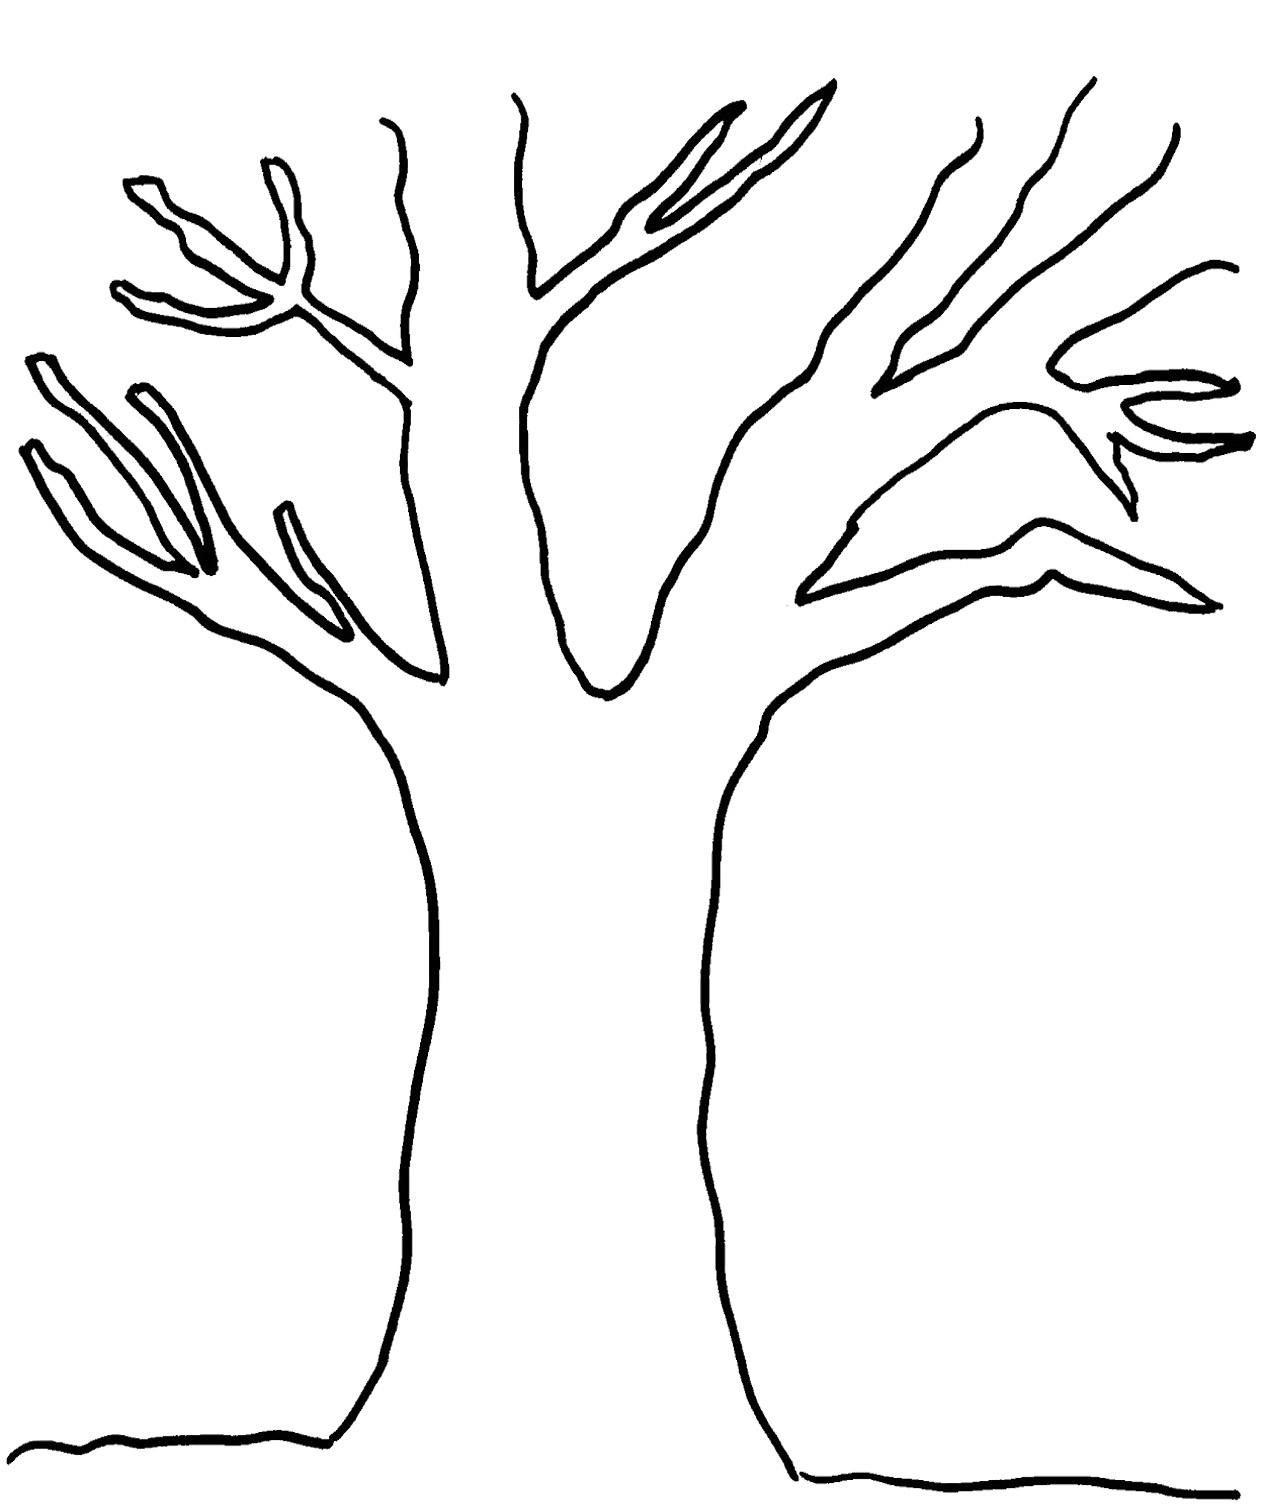 Tree clipart outline no leaves